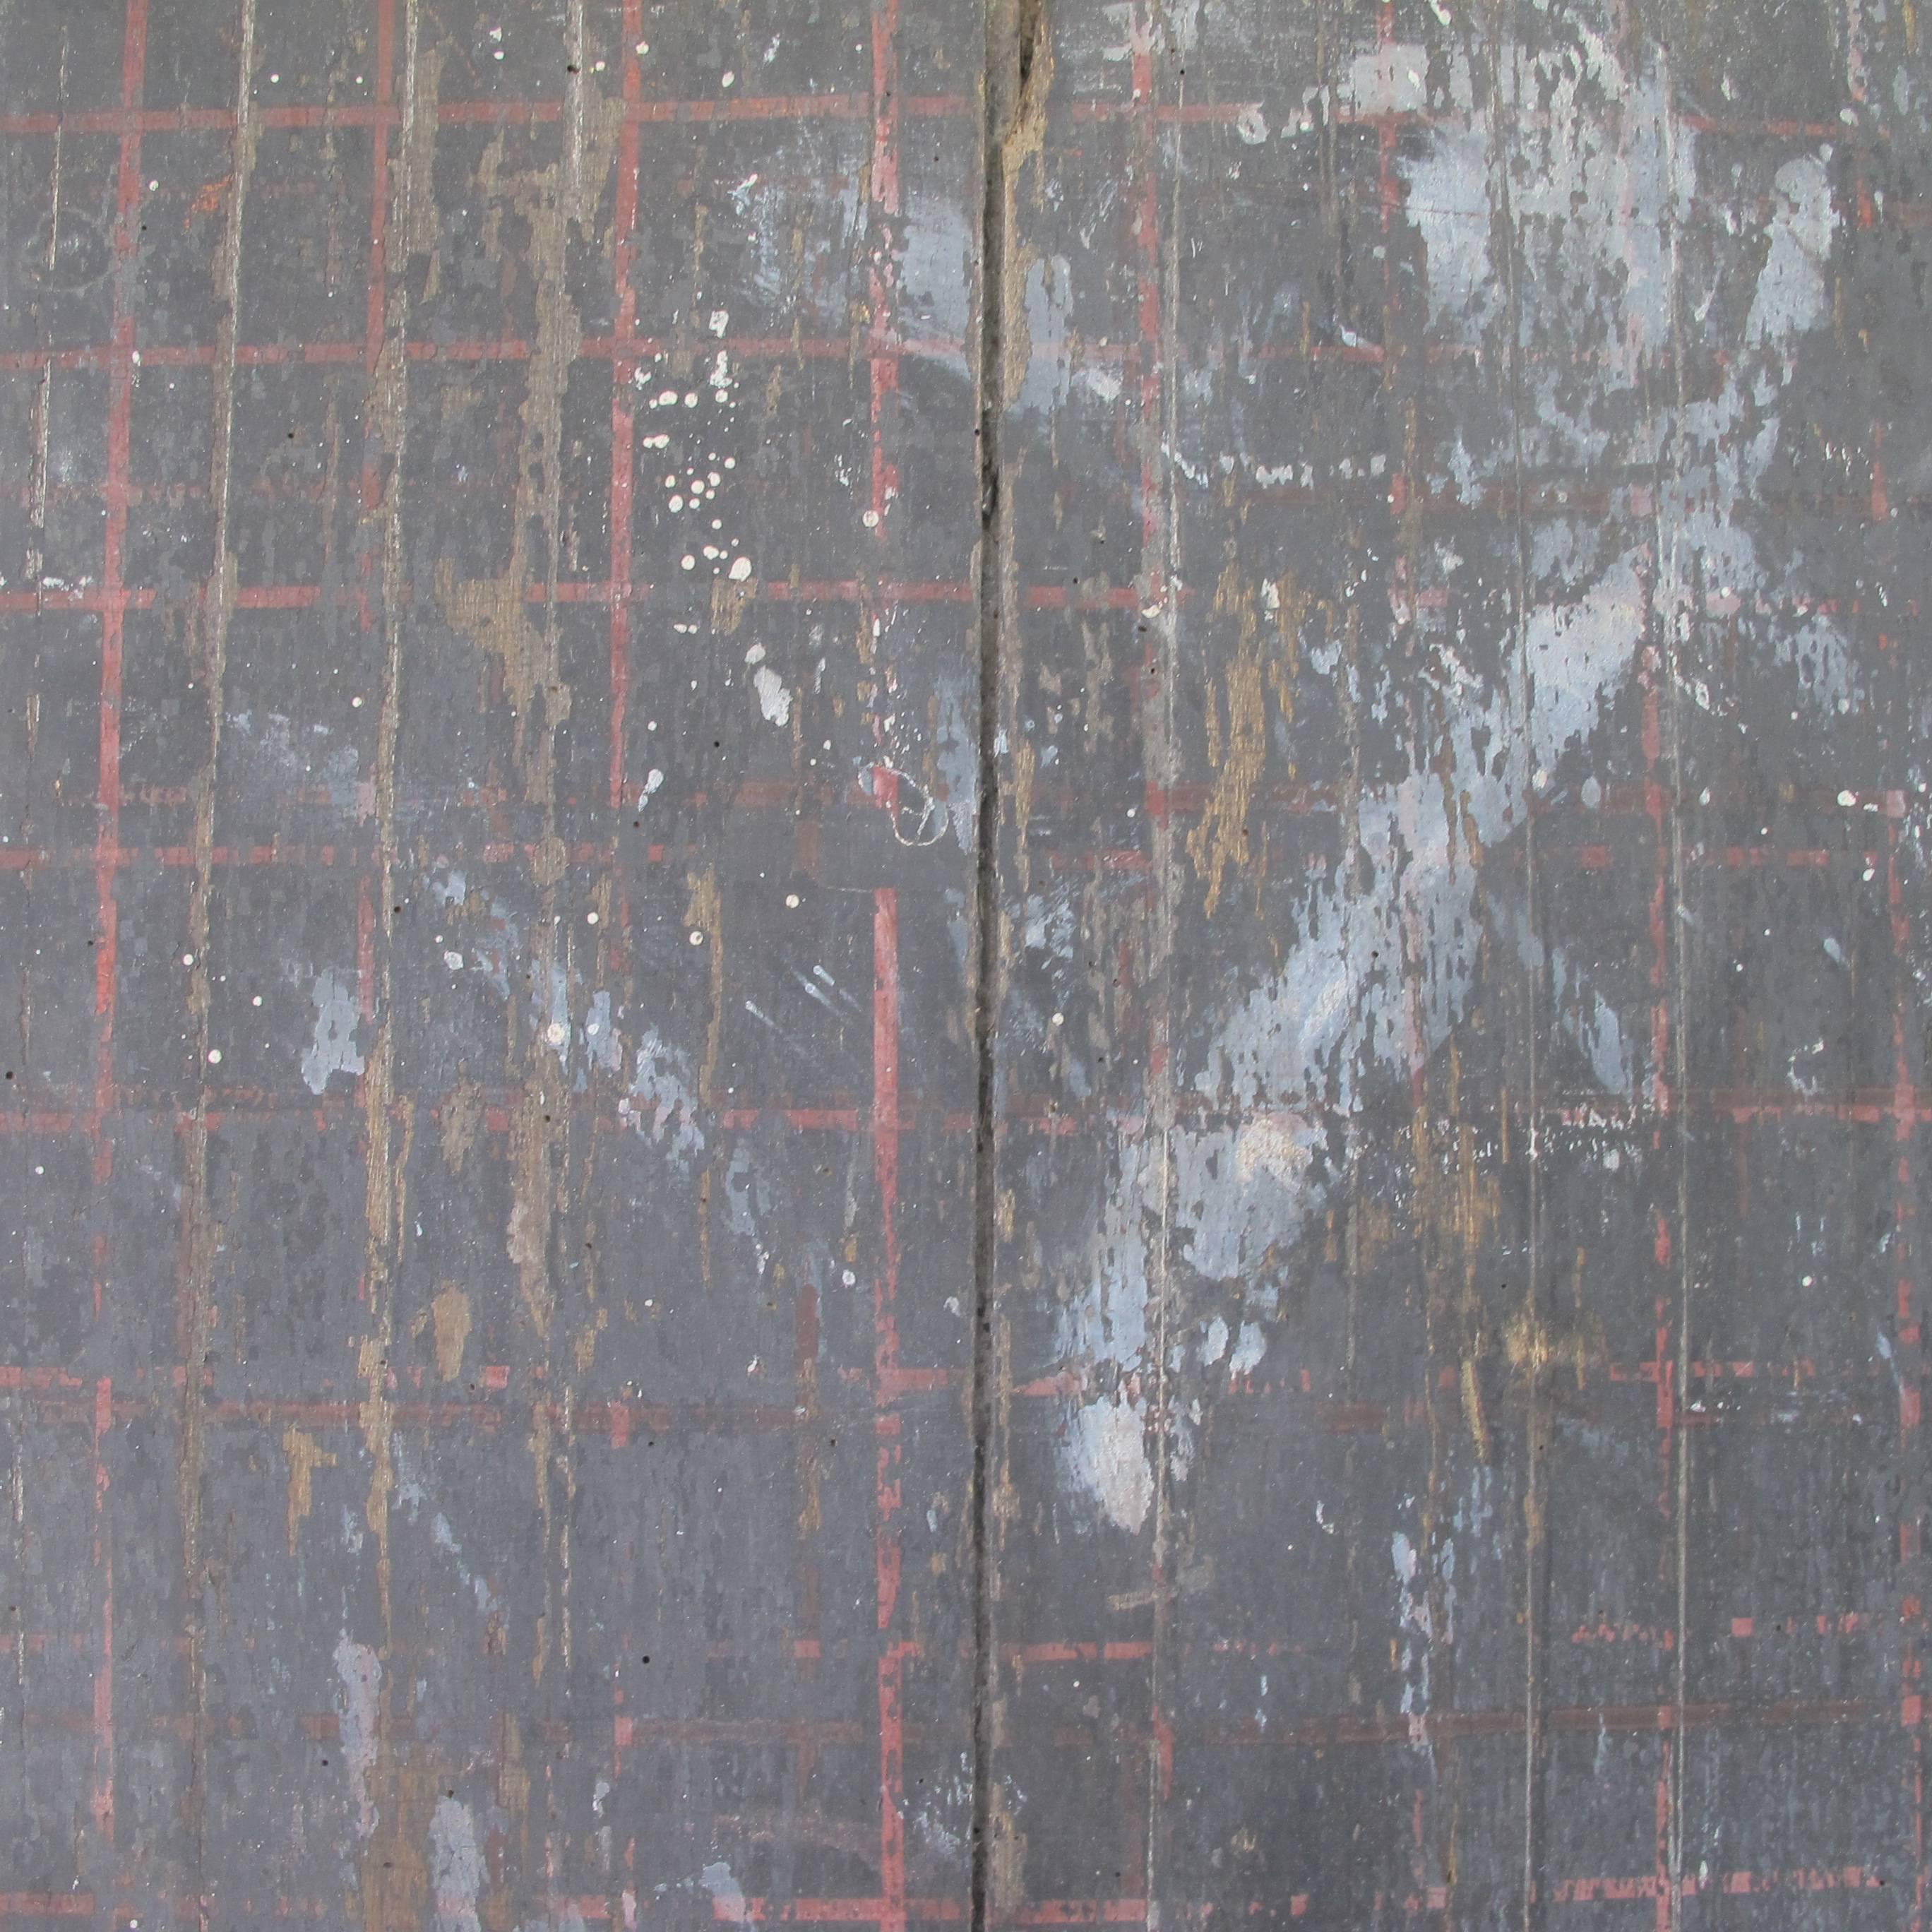 An old painting on four board panel by unknown artist of ethereal space. A mysterious red grid is overlaid on the black space with veils of mystery and star - like patterns behind and in front of grid. In many ways it looks like what you might see